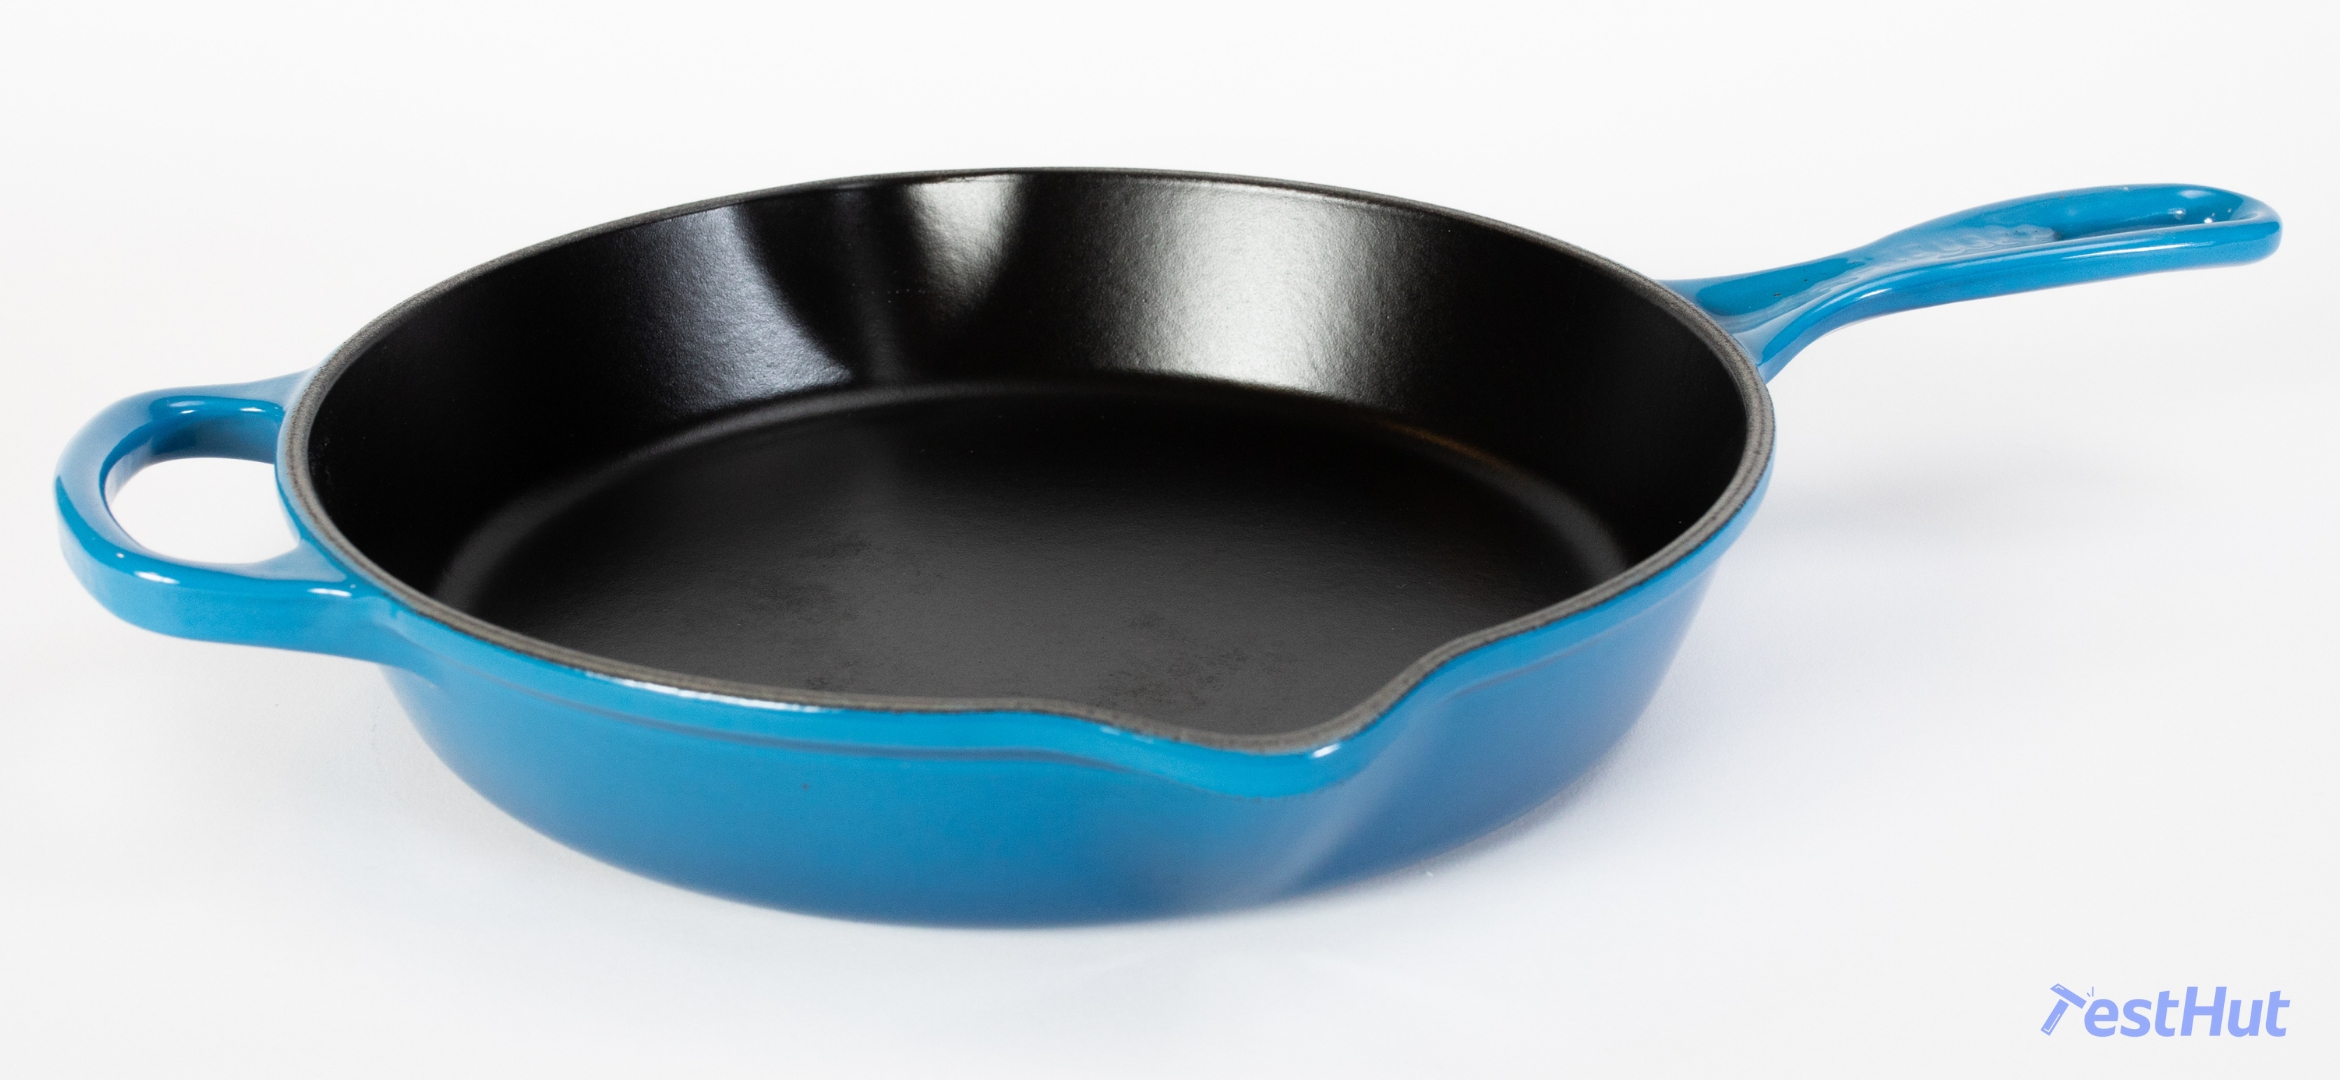 Le Creuset, Enameled Cast Iron Cookware Cleaner